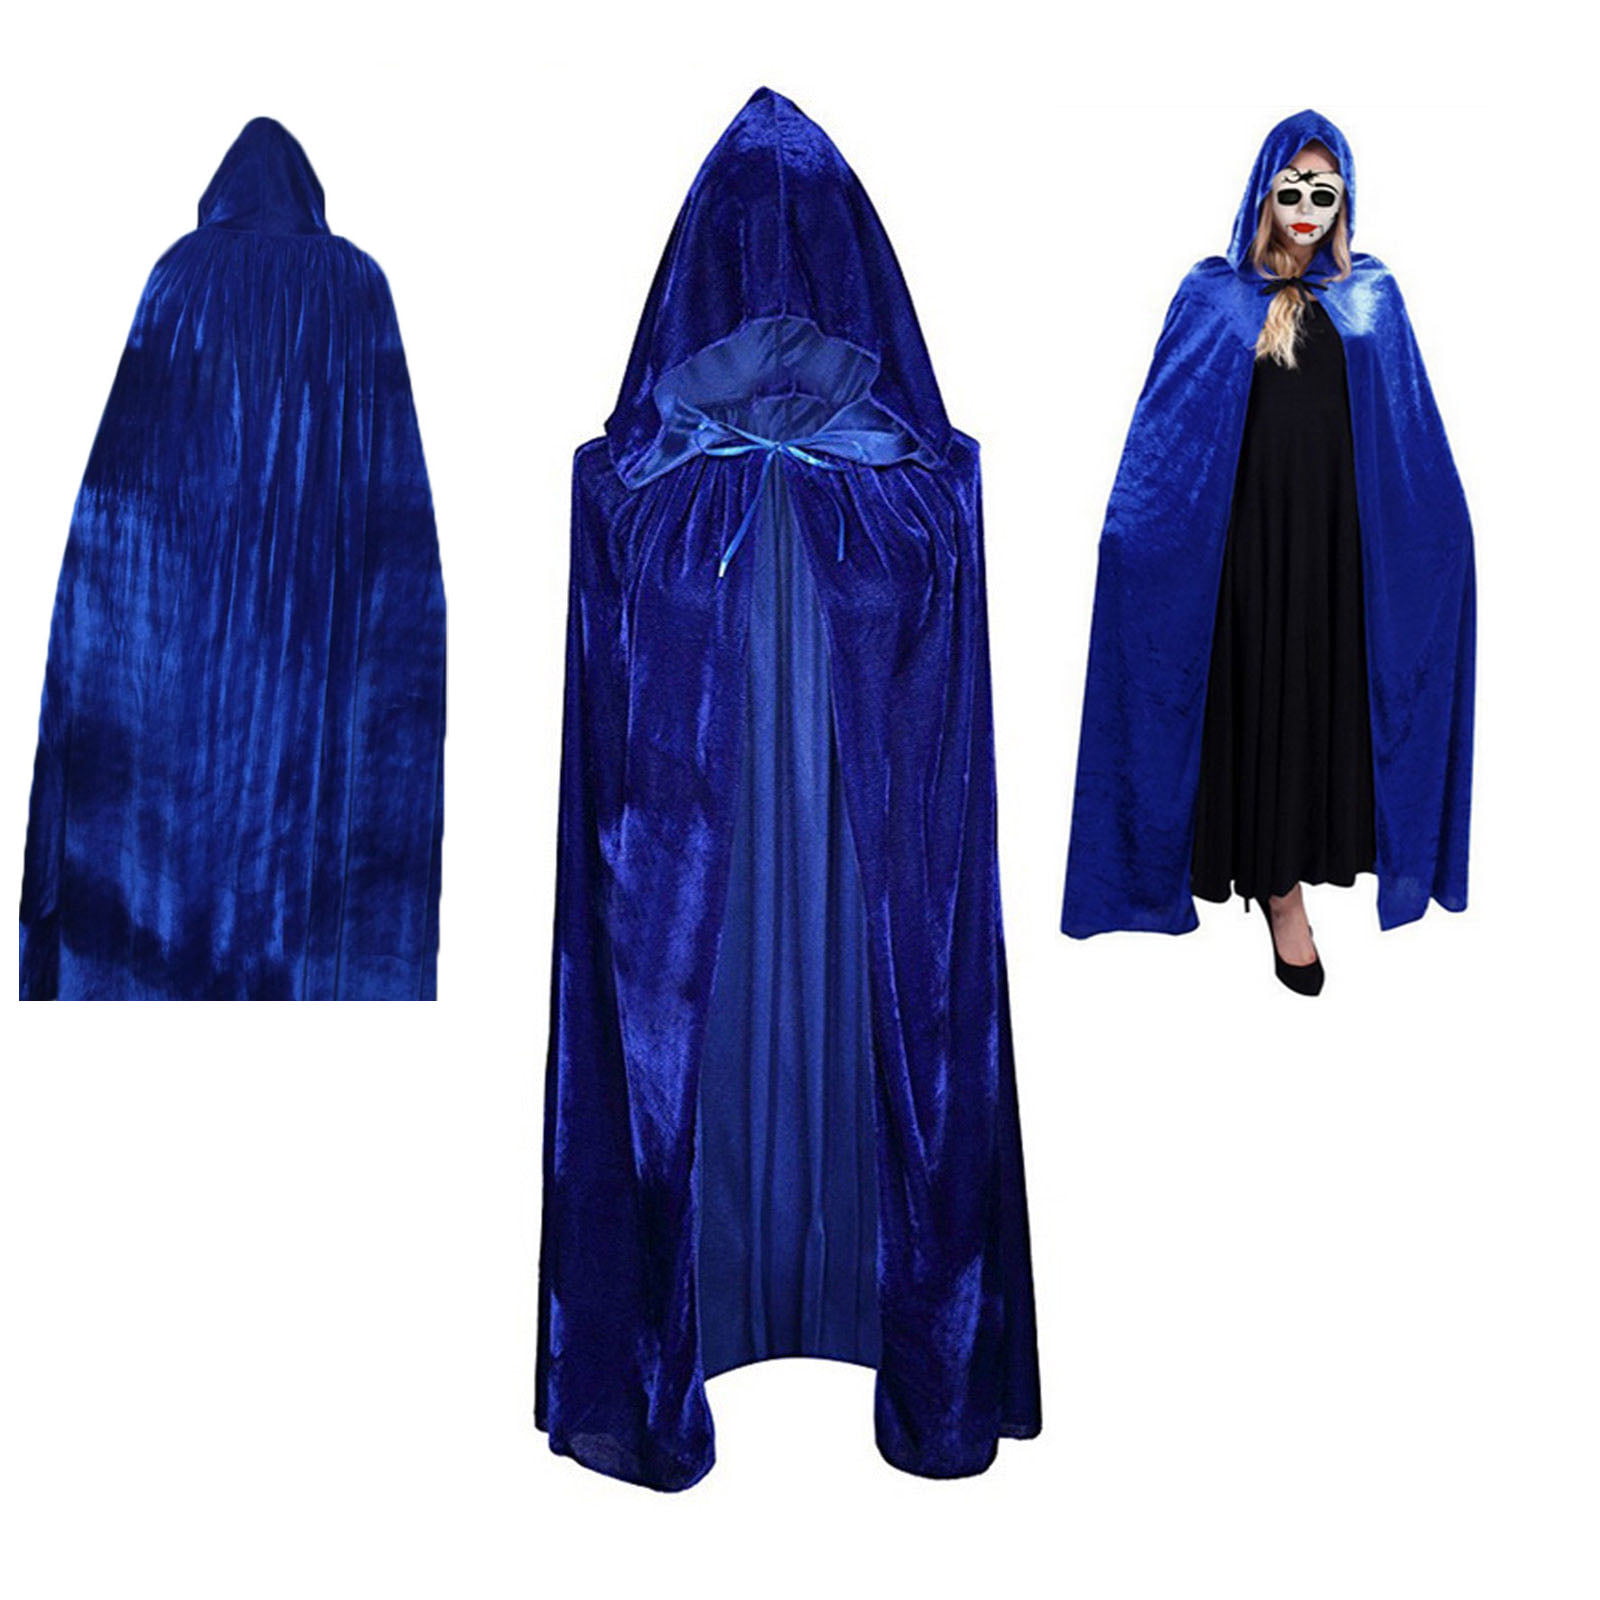 Special Bridal Long Unisex Velvet Capes with Hood Adult Halloween Christmas Cosplay Costume Cloaks